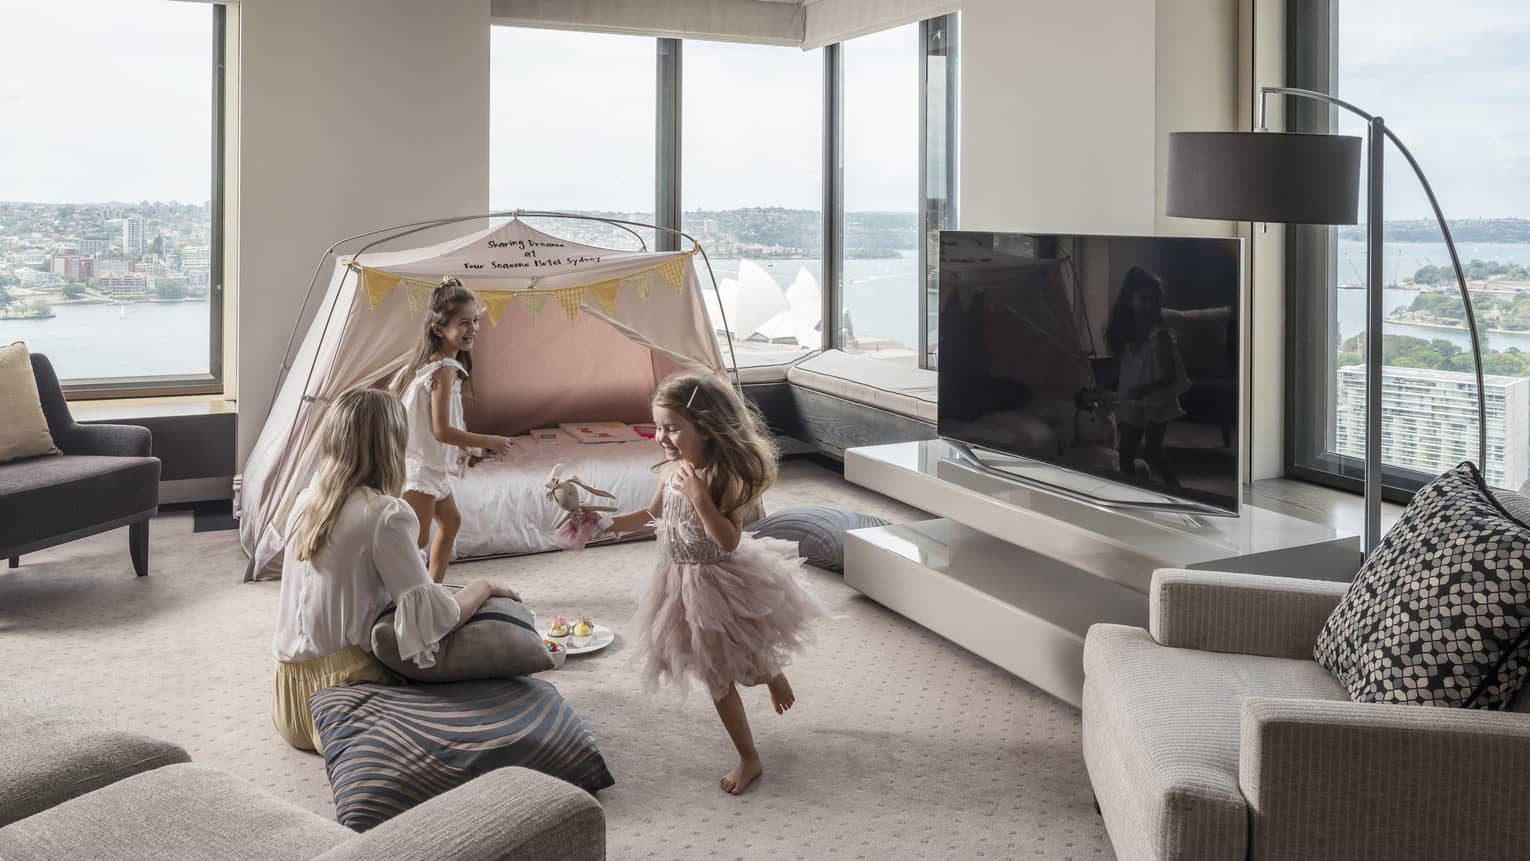 Sleep-in luxury tent experience for kids